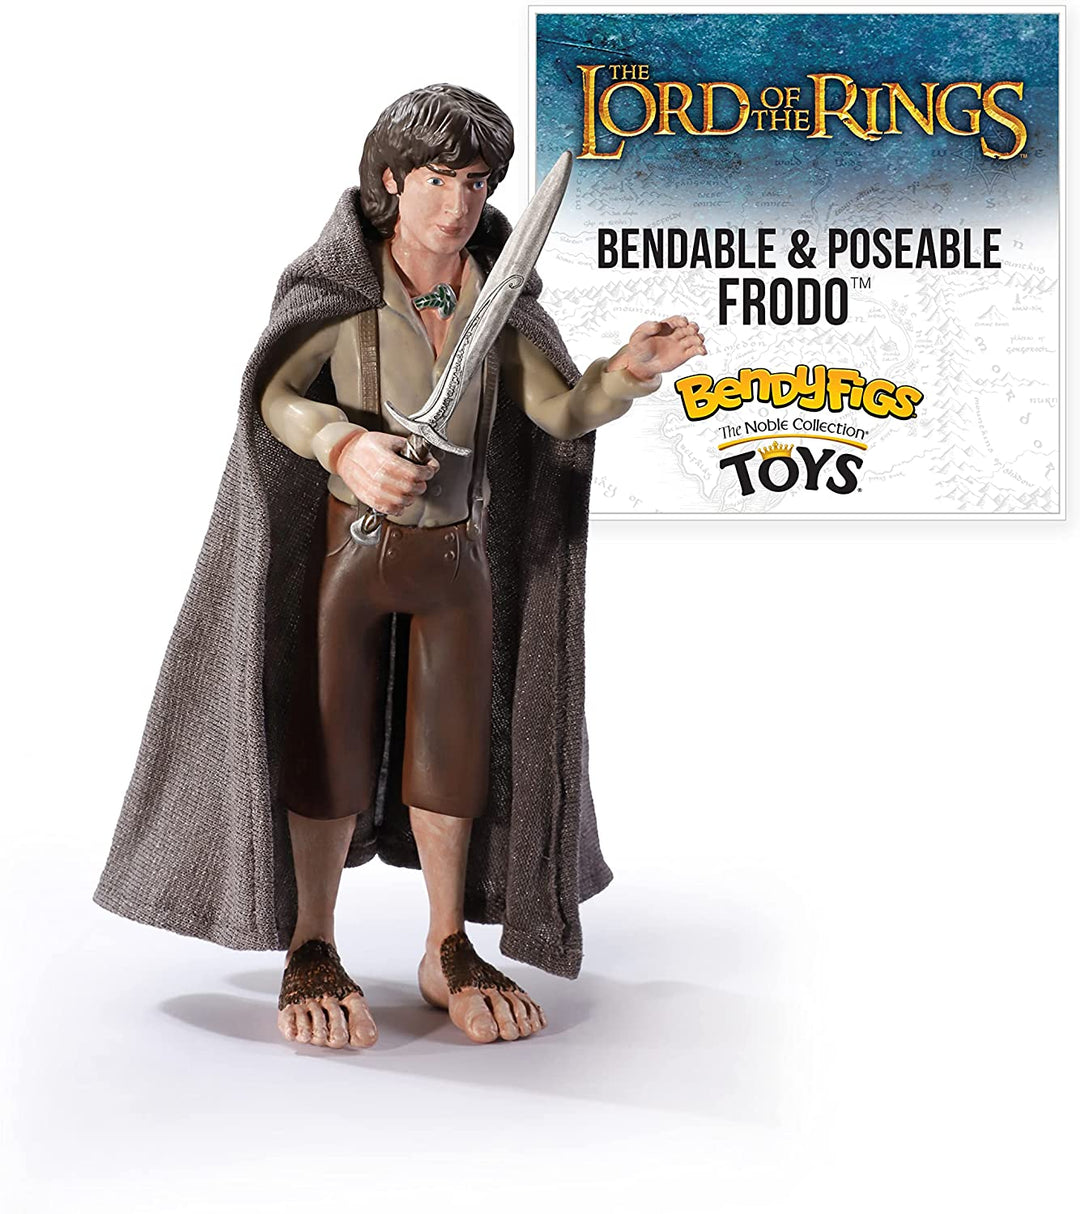 The Noble Collection LoTR Bendyfigs Frodo Baggins - Officially Licensed 19cm (7.5 inch) Lord Of The Rings Bendable Posable Collectable Doll Figures With Stand